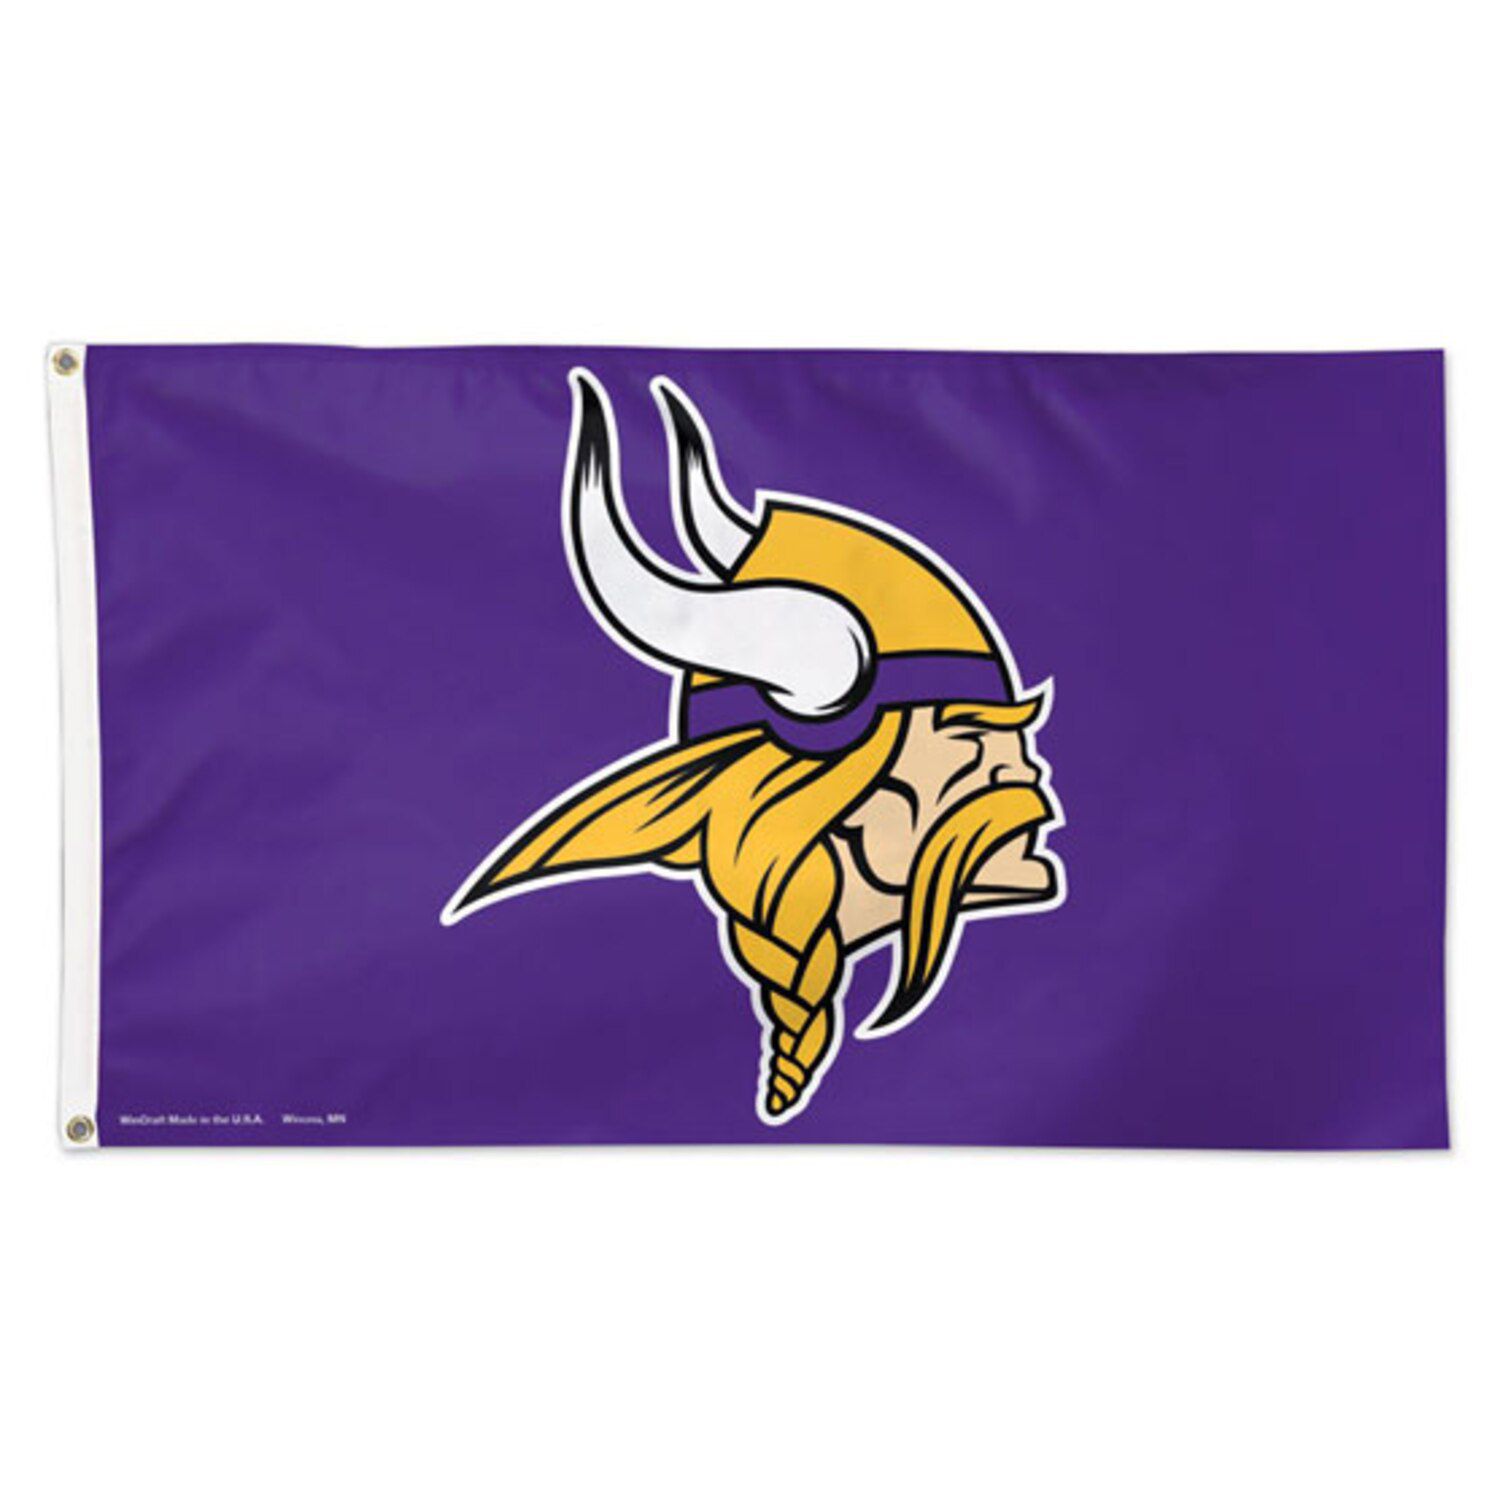 Image for Unbranded WinCraft Minnesota Vikings Deluxe 3' x 5' Flag at Kohl's.